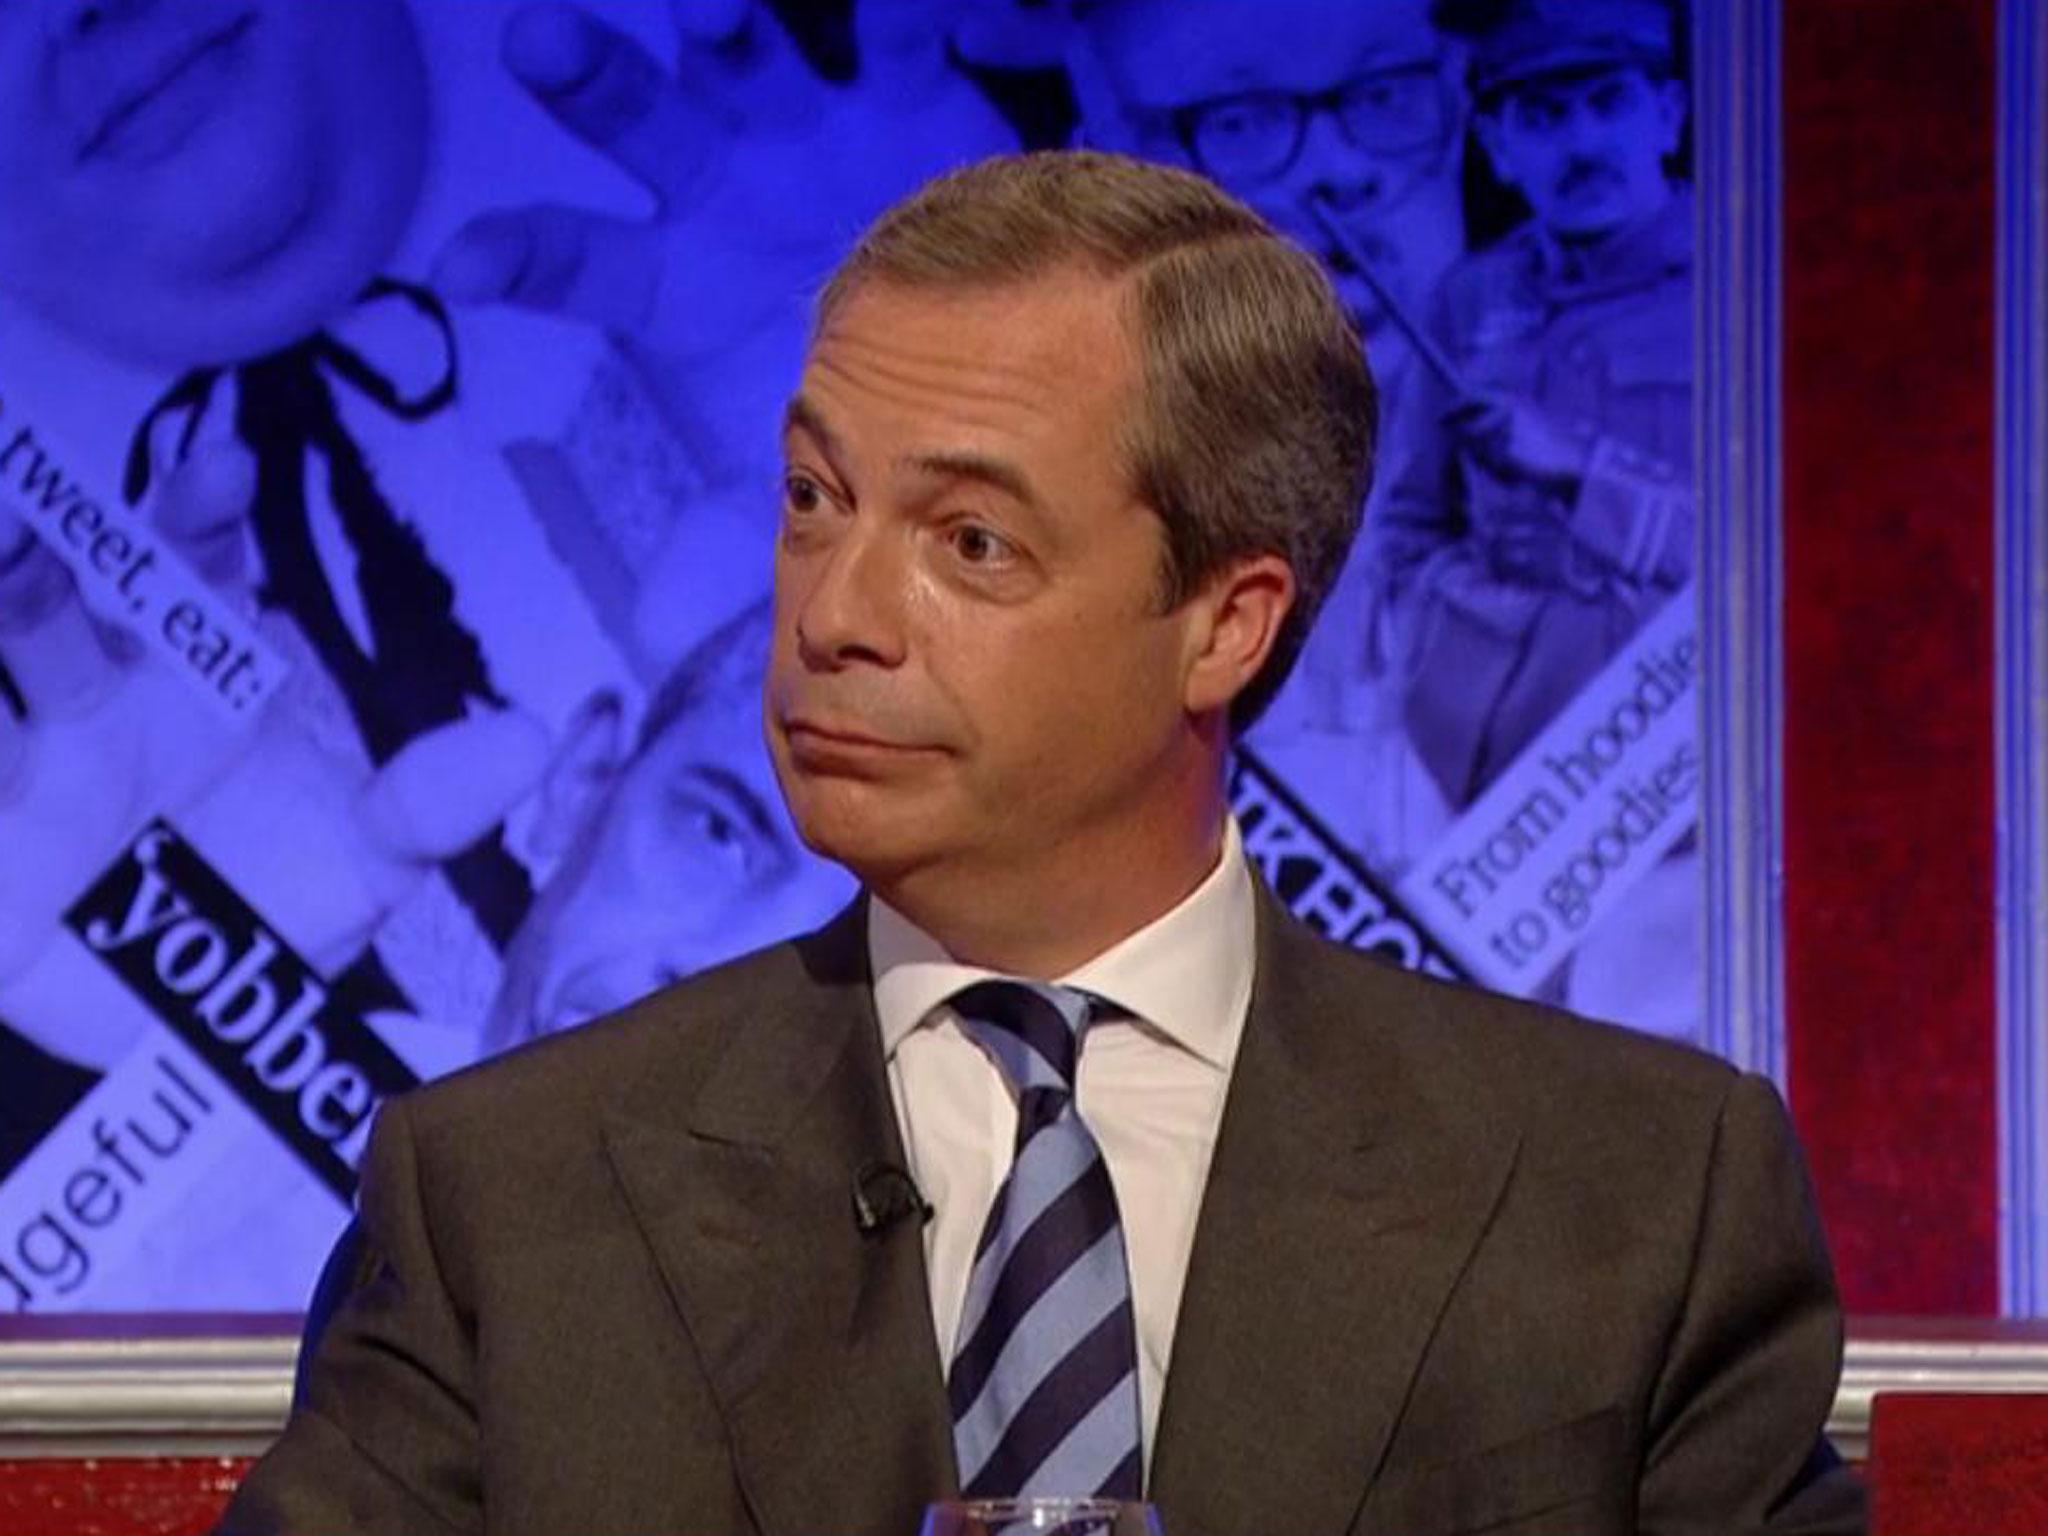 Nigel Farage appeared on Have I Got News For You last year